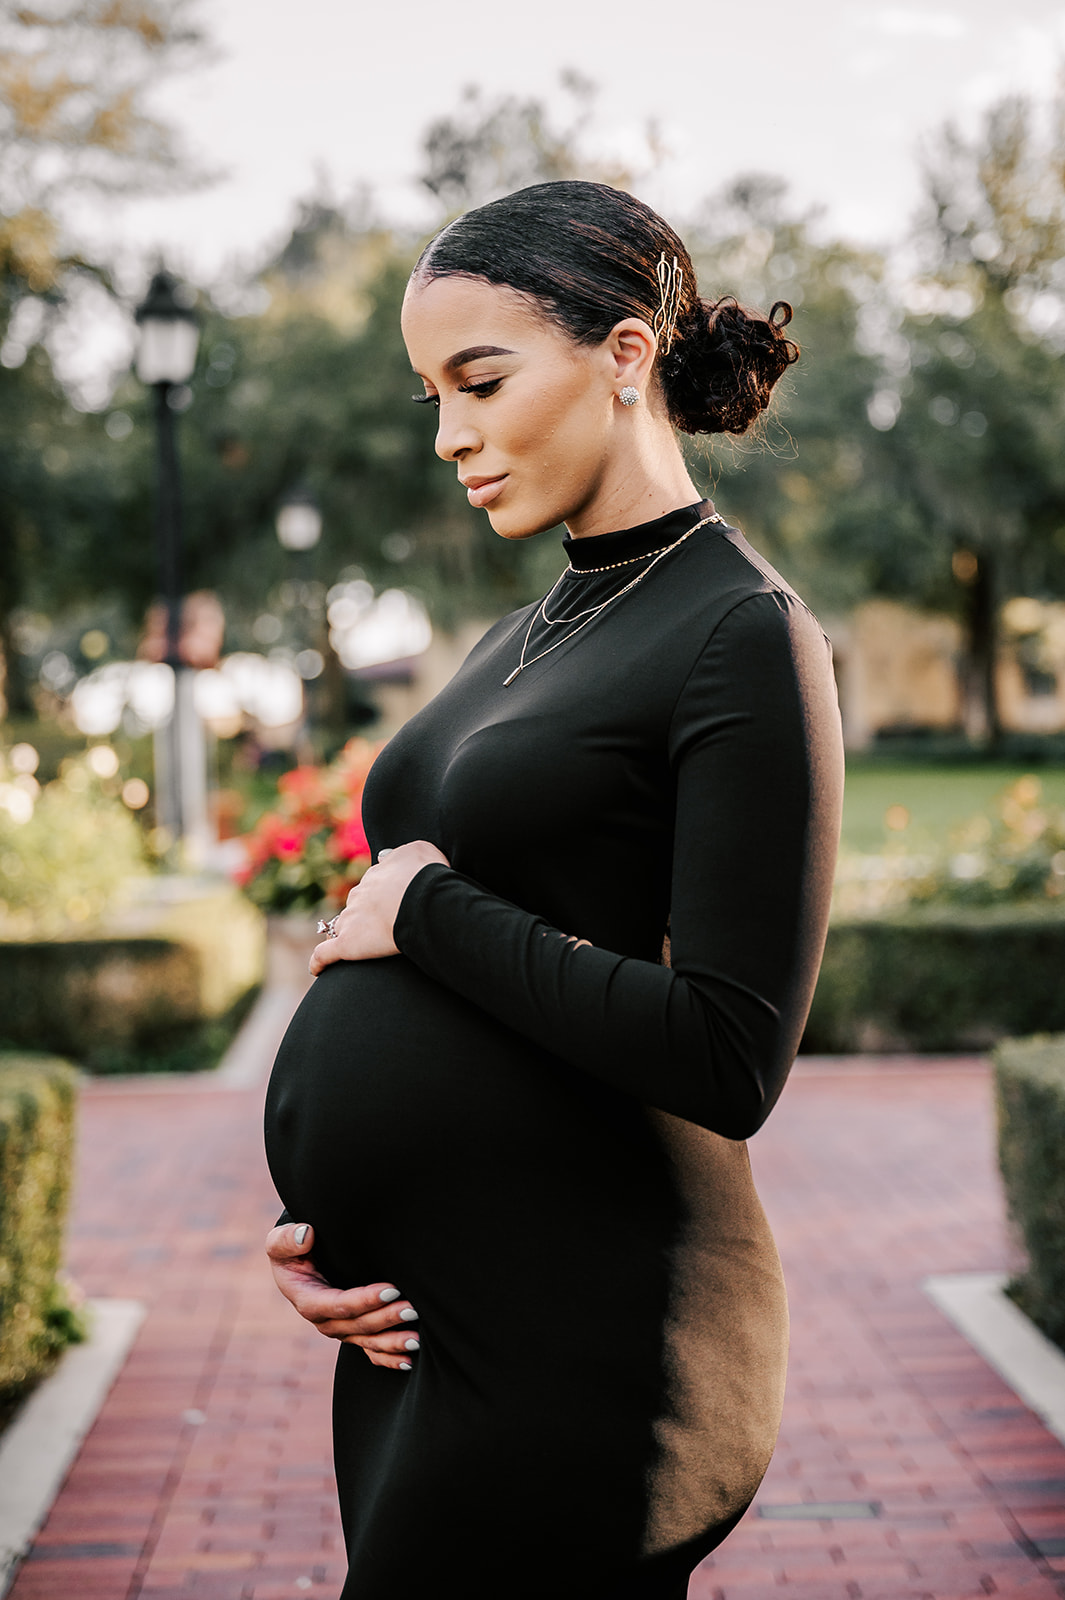 A pregnant woman stands on a brick path in a rose garden while holding the top and bottom of her bump Precious Arrrows